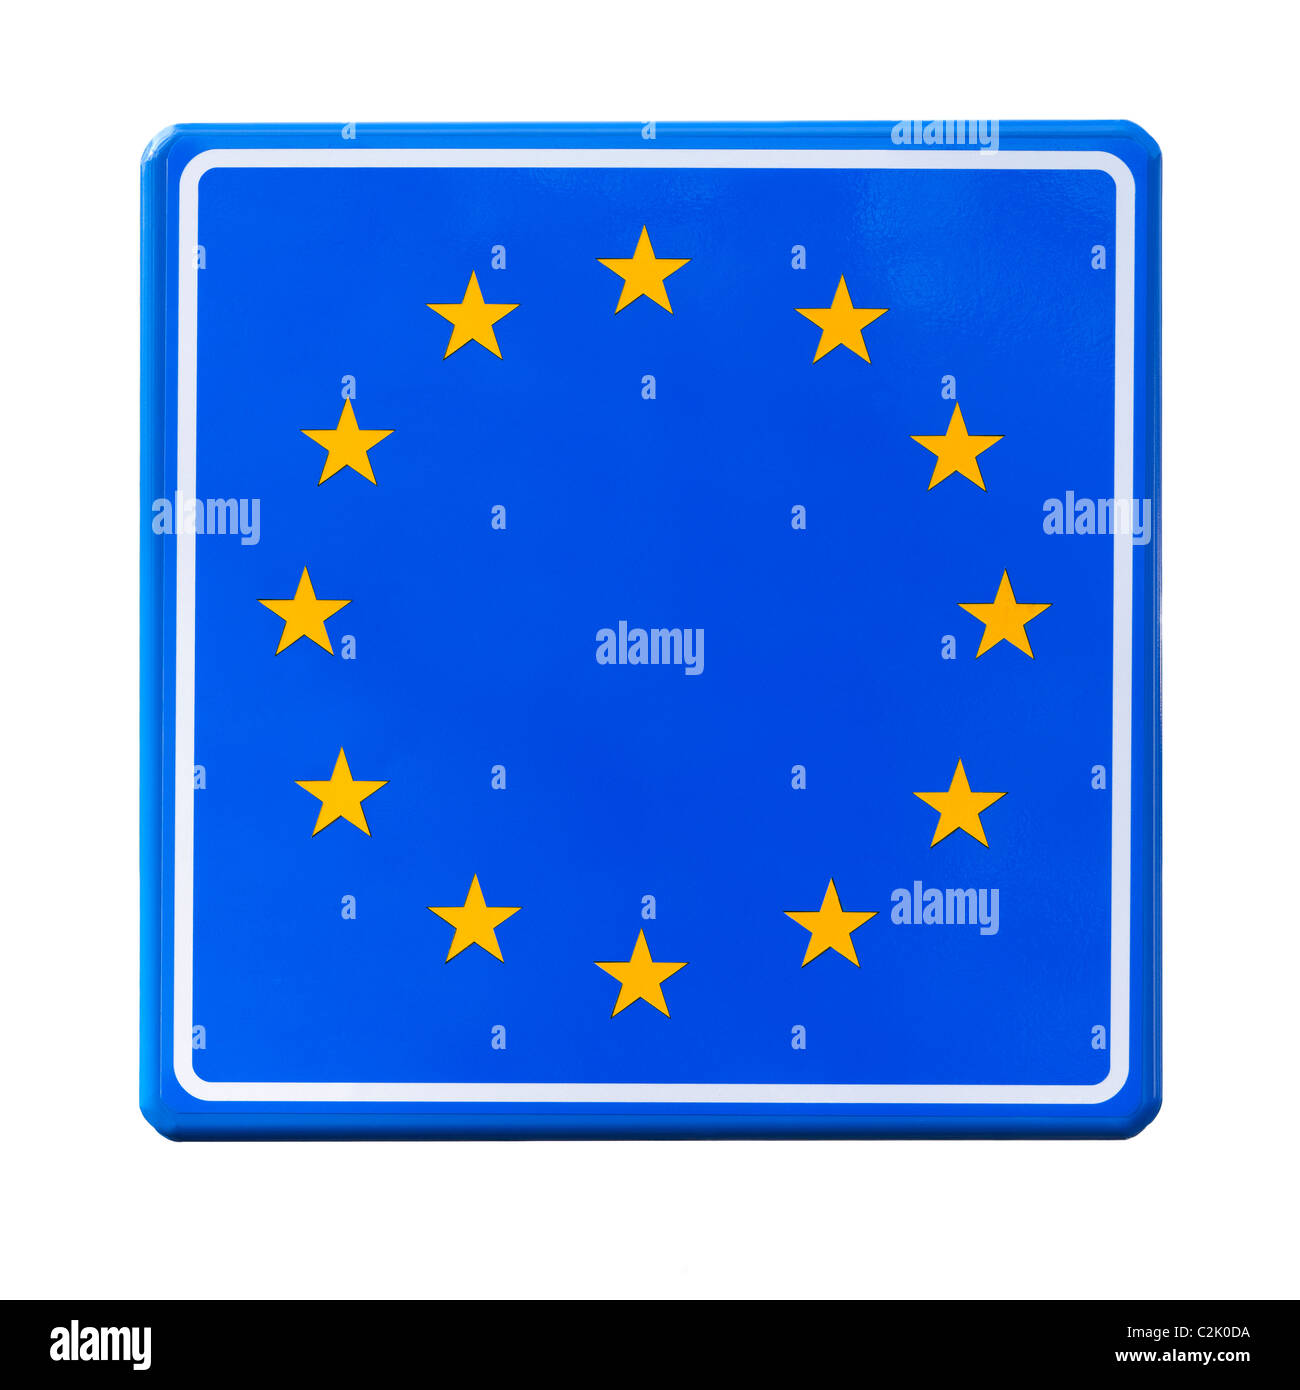 Empty EU European Union border road sign, roadsign cut out cutout. Europe sign, Europa symbol without a country name bhz Stock Photo